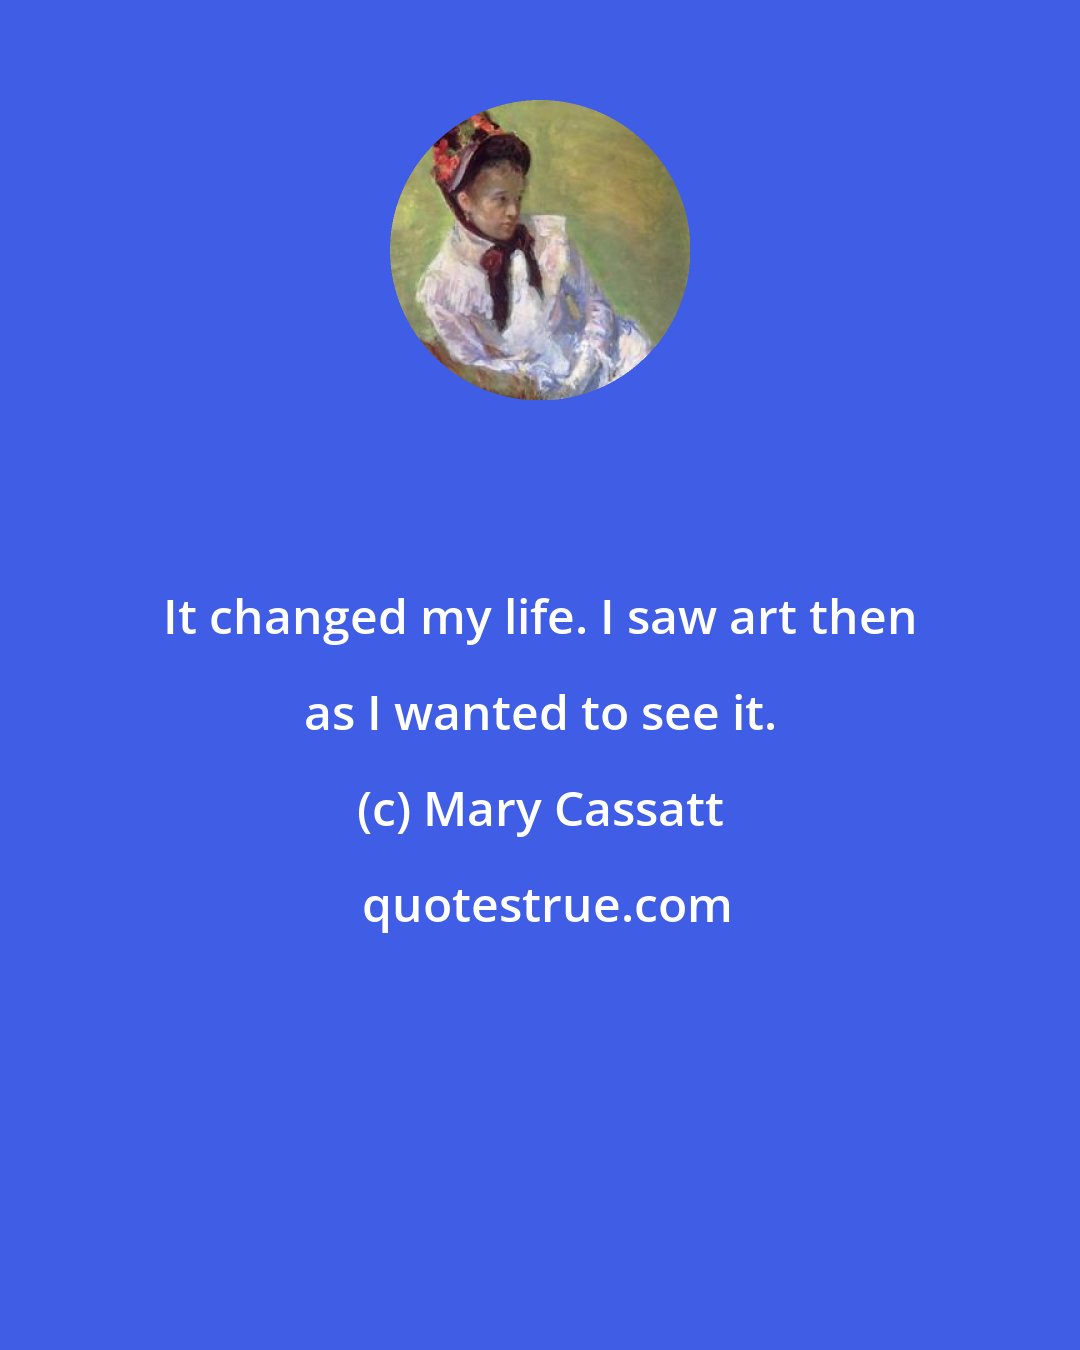 Mary Cassatt: It changed my life. I saw art then as I wanted to see it.